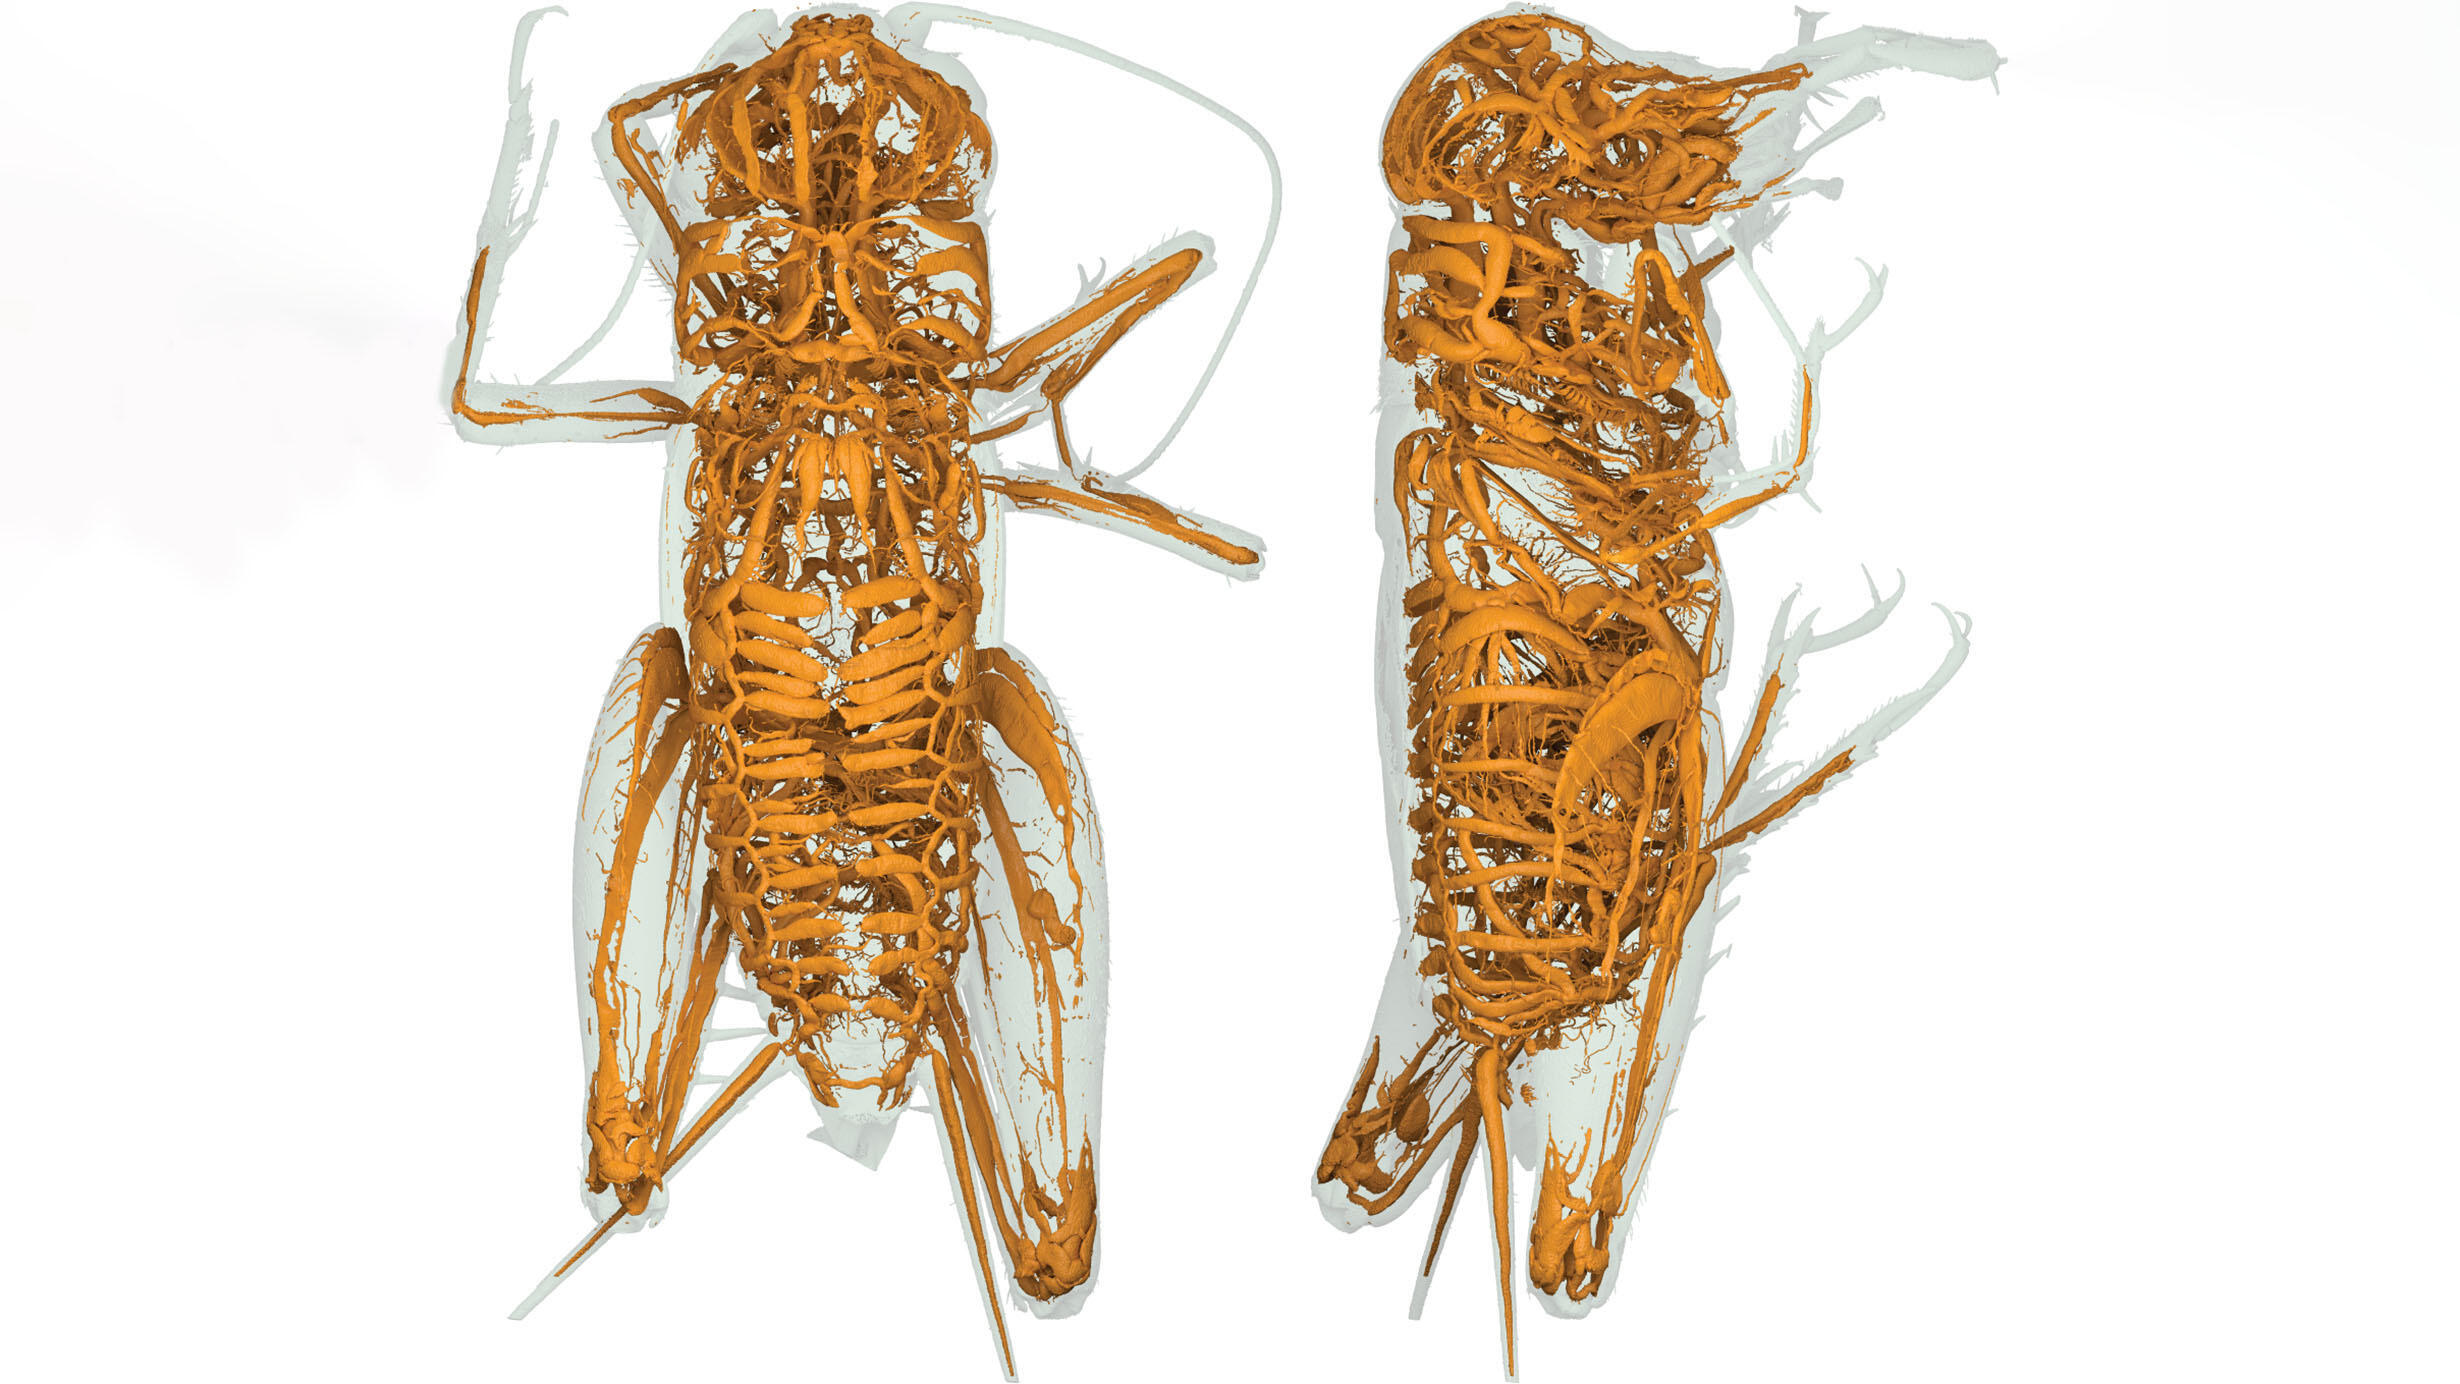 Side-by-side scans of a field cricket from above and the side with tracheal systems depicting in bright color against light background.